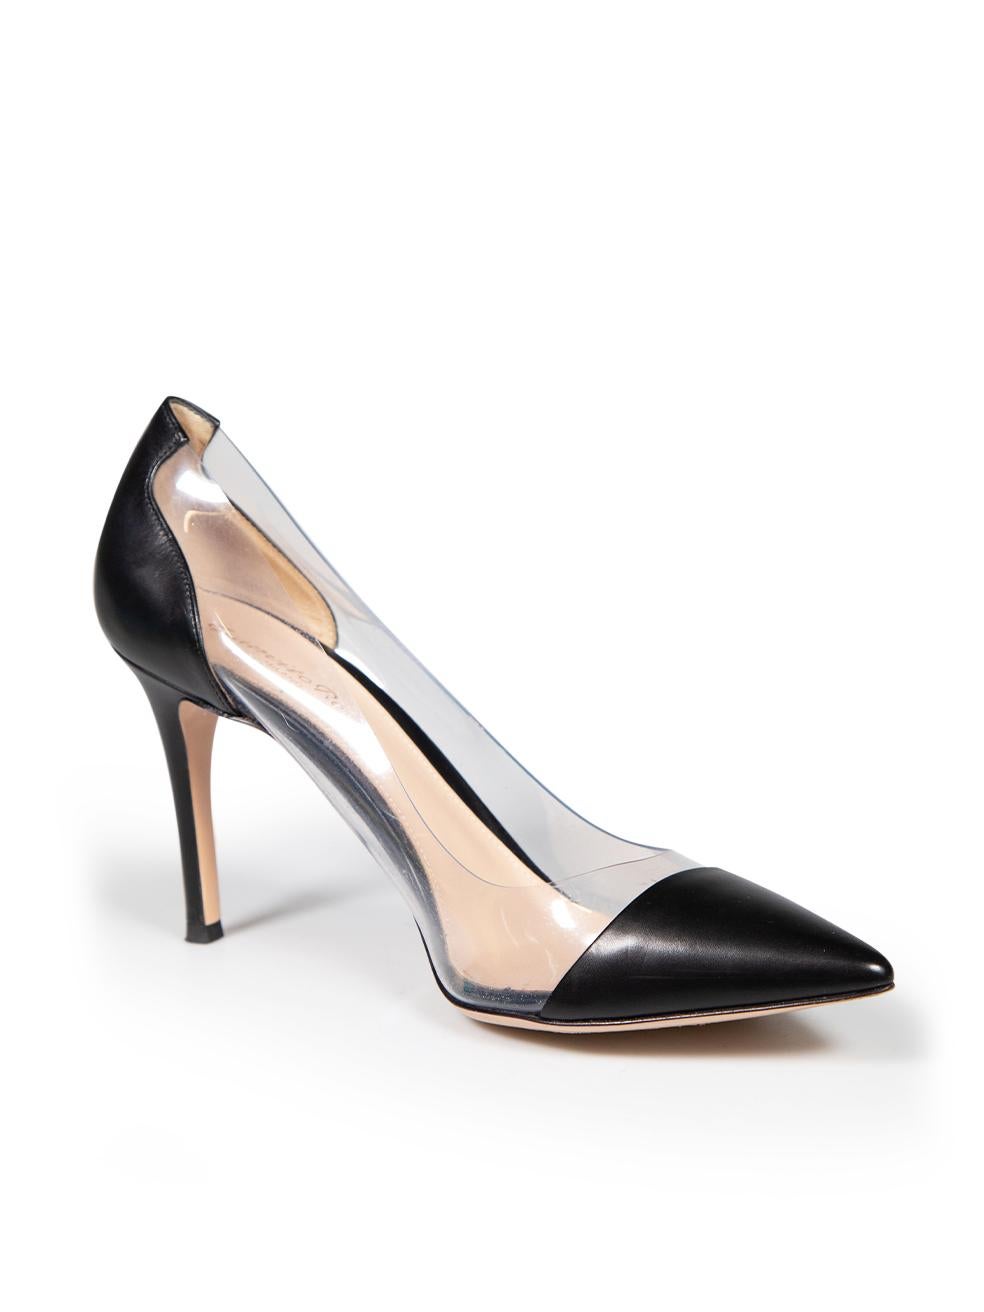 CONDITION is Very good. Minimal wear to pumps is evident. Minimal indent to the tip of right shoe and minor debris caught on the sides on this used Gianvito Rossi designer resale item.
 
 
 
 Details
 
 
 Black
 
 Leather
 
 Pumps
 
 Point toe
 
